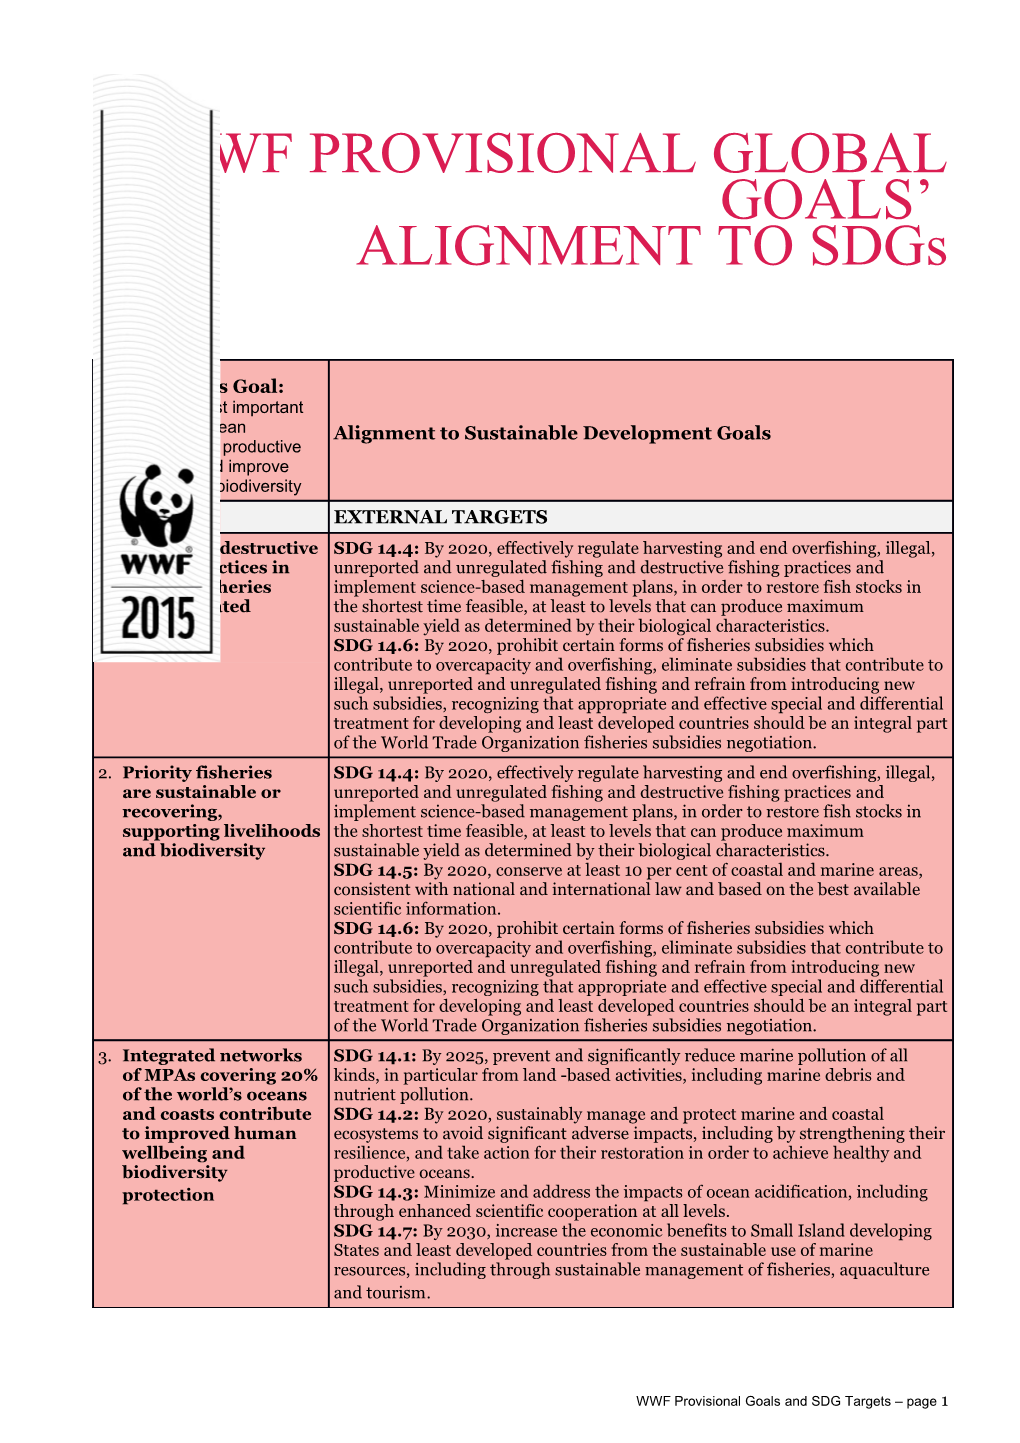 WWF PROVISIONAL GLOBAL GOALS ALIGNMENT to Sdgs